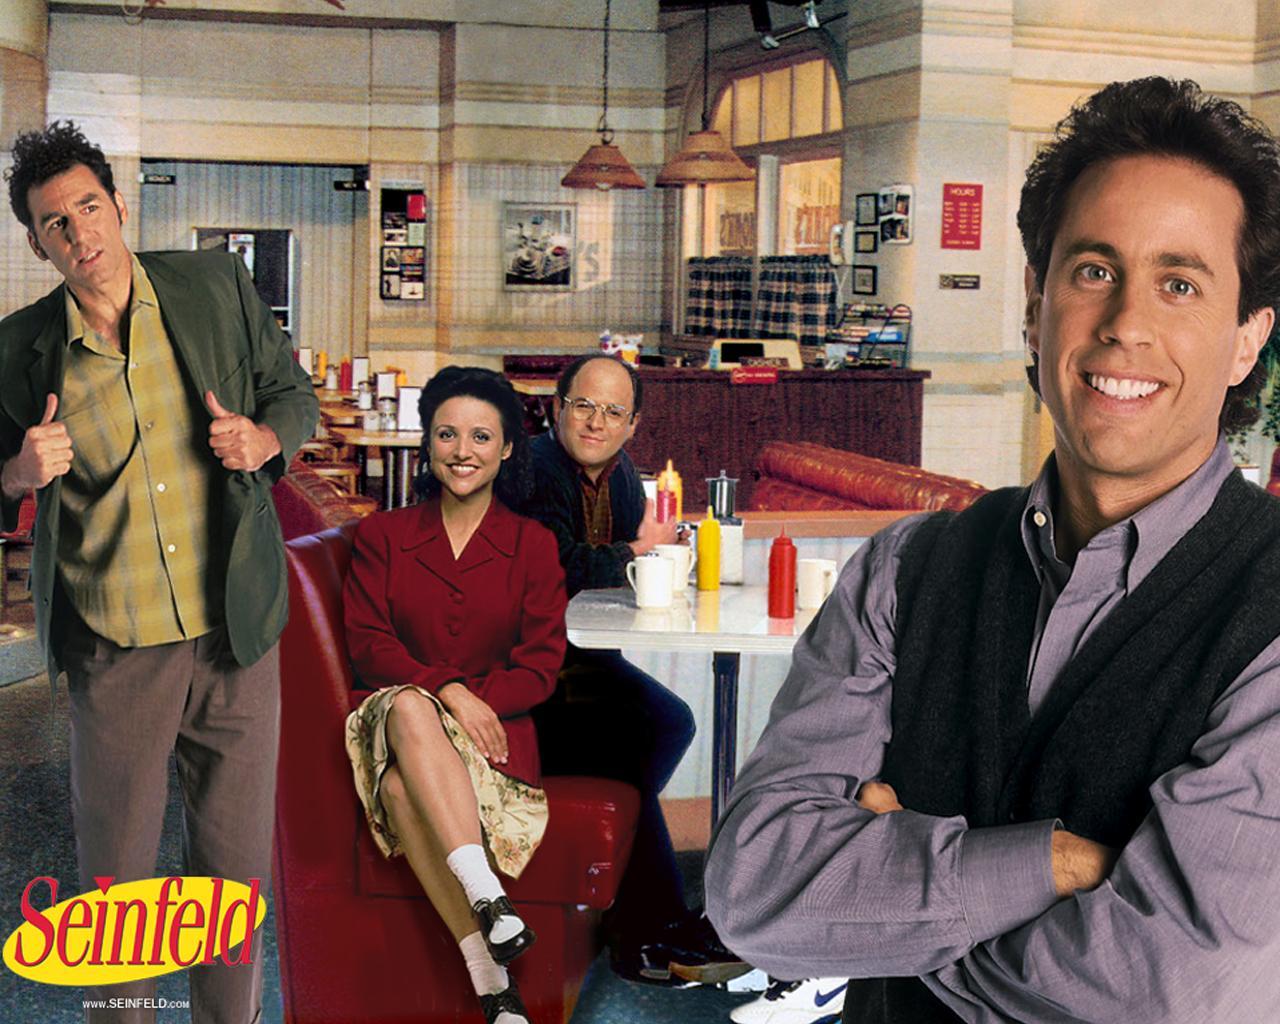 19 Iphone wallpaper ideas  seinfeld seinfeld quotes seinfeld funny